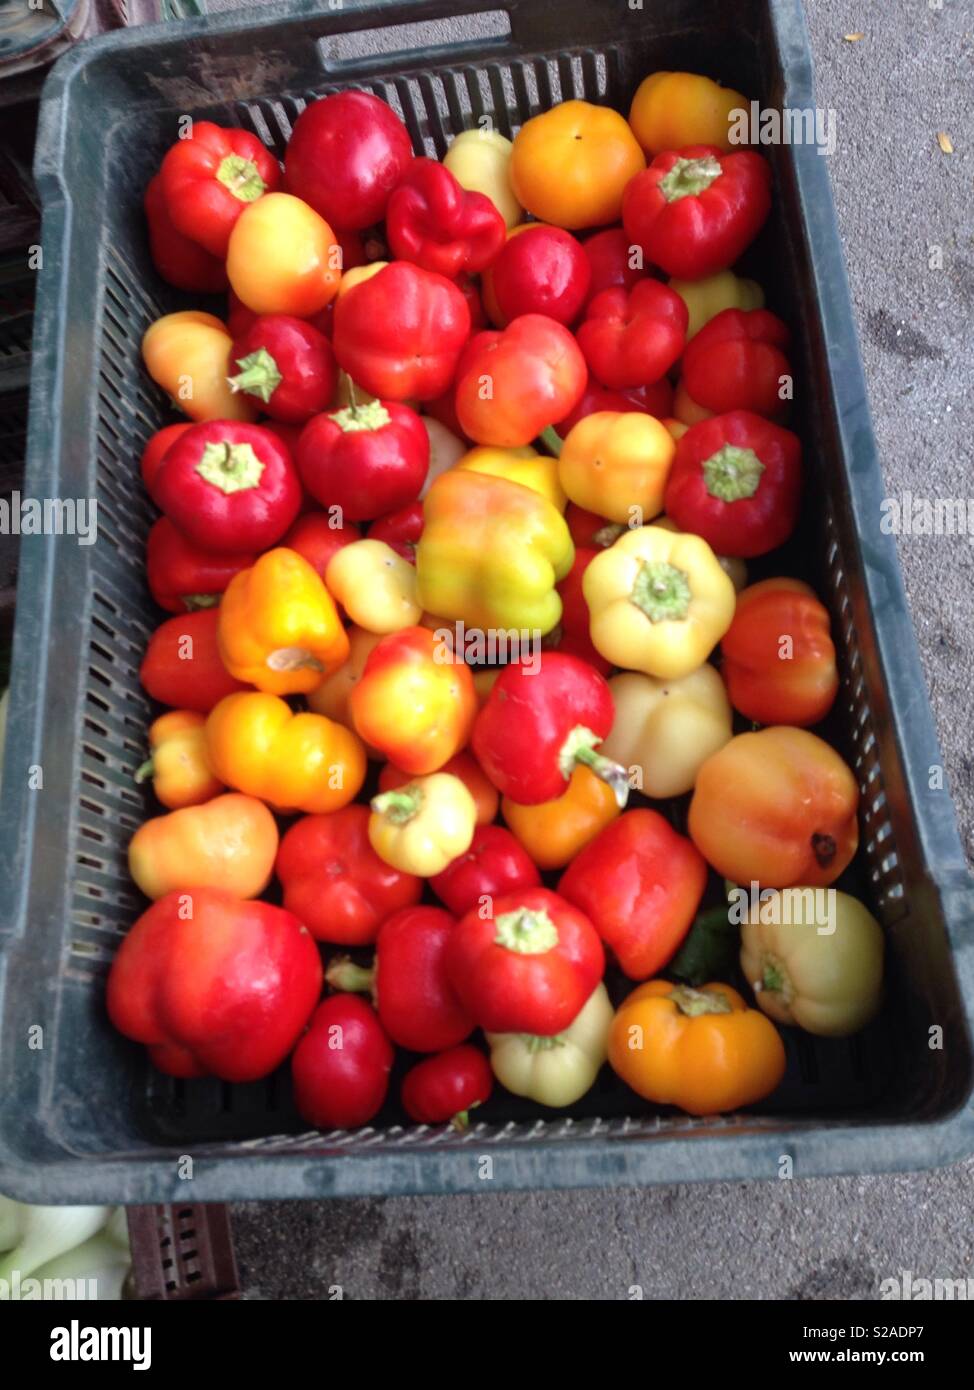 pepper of various colors and sizes Stock Photo